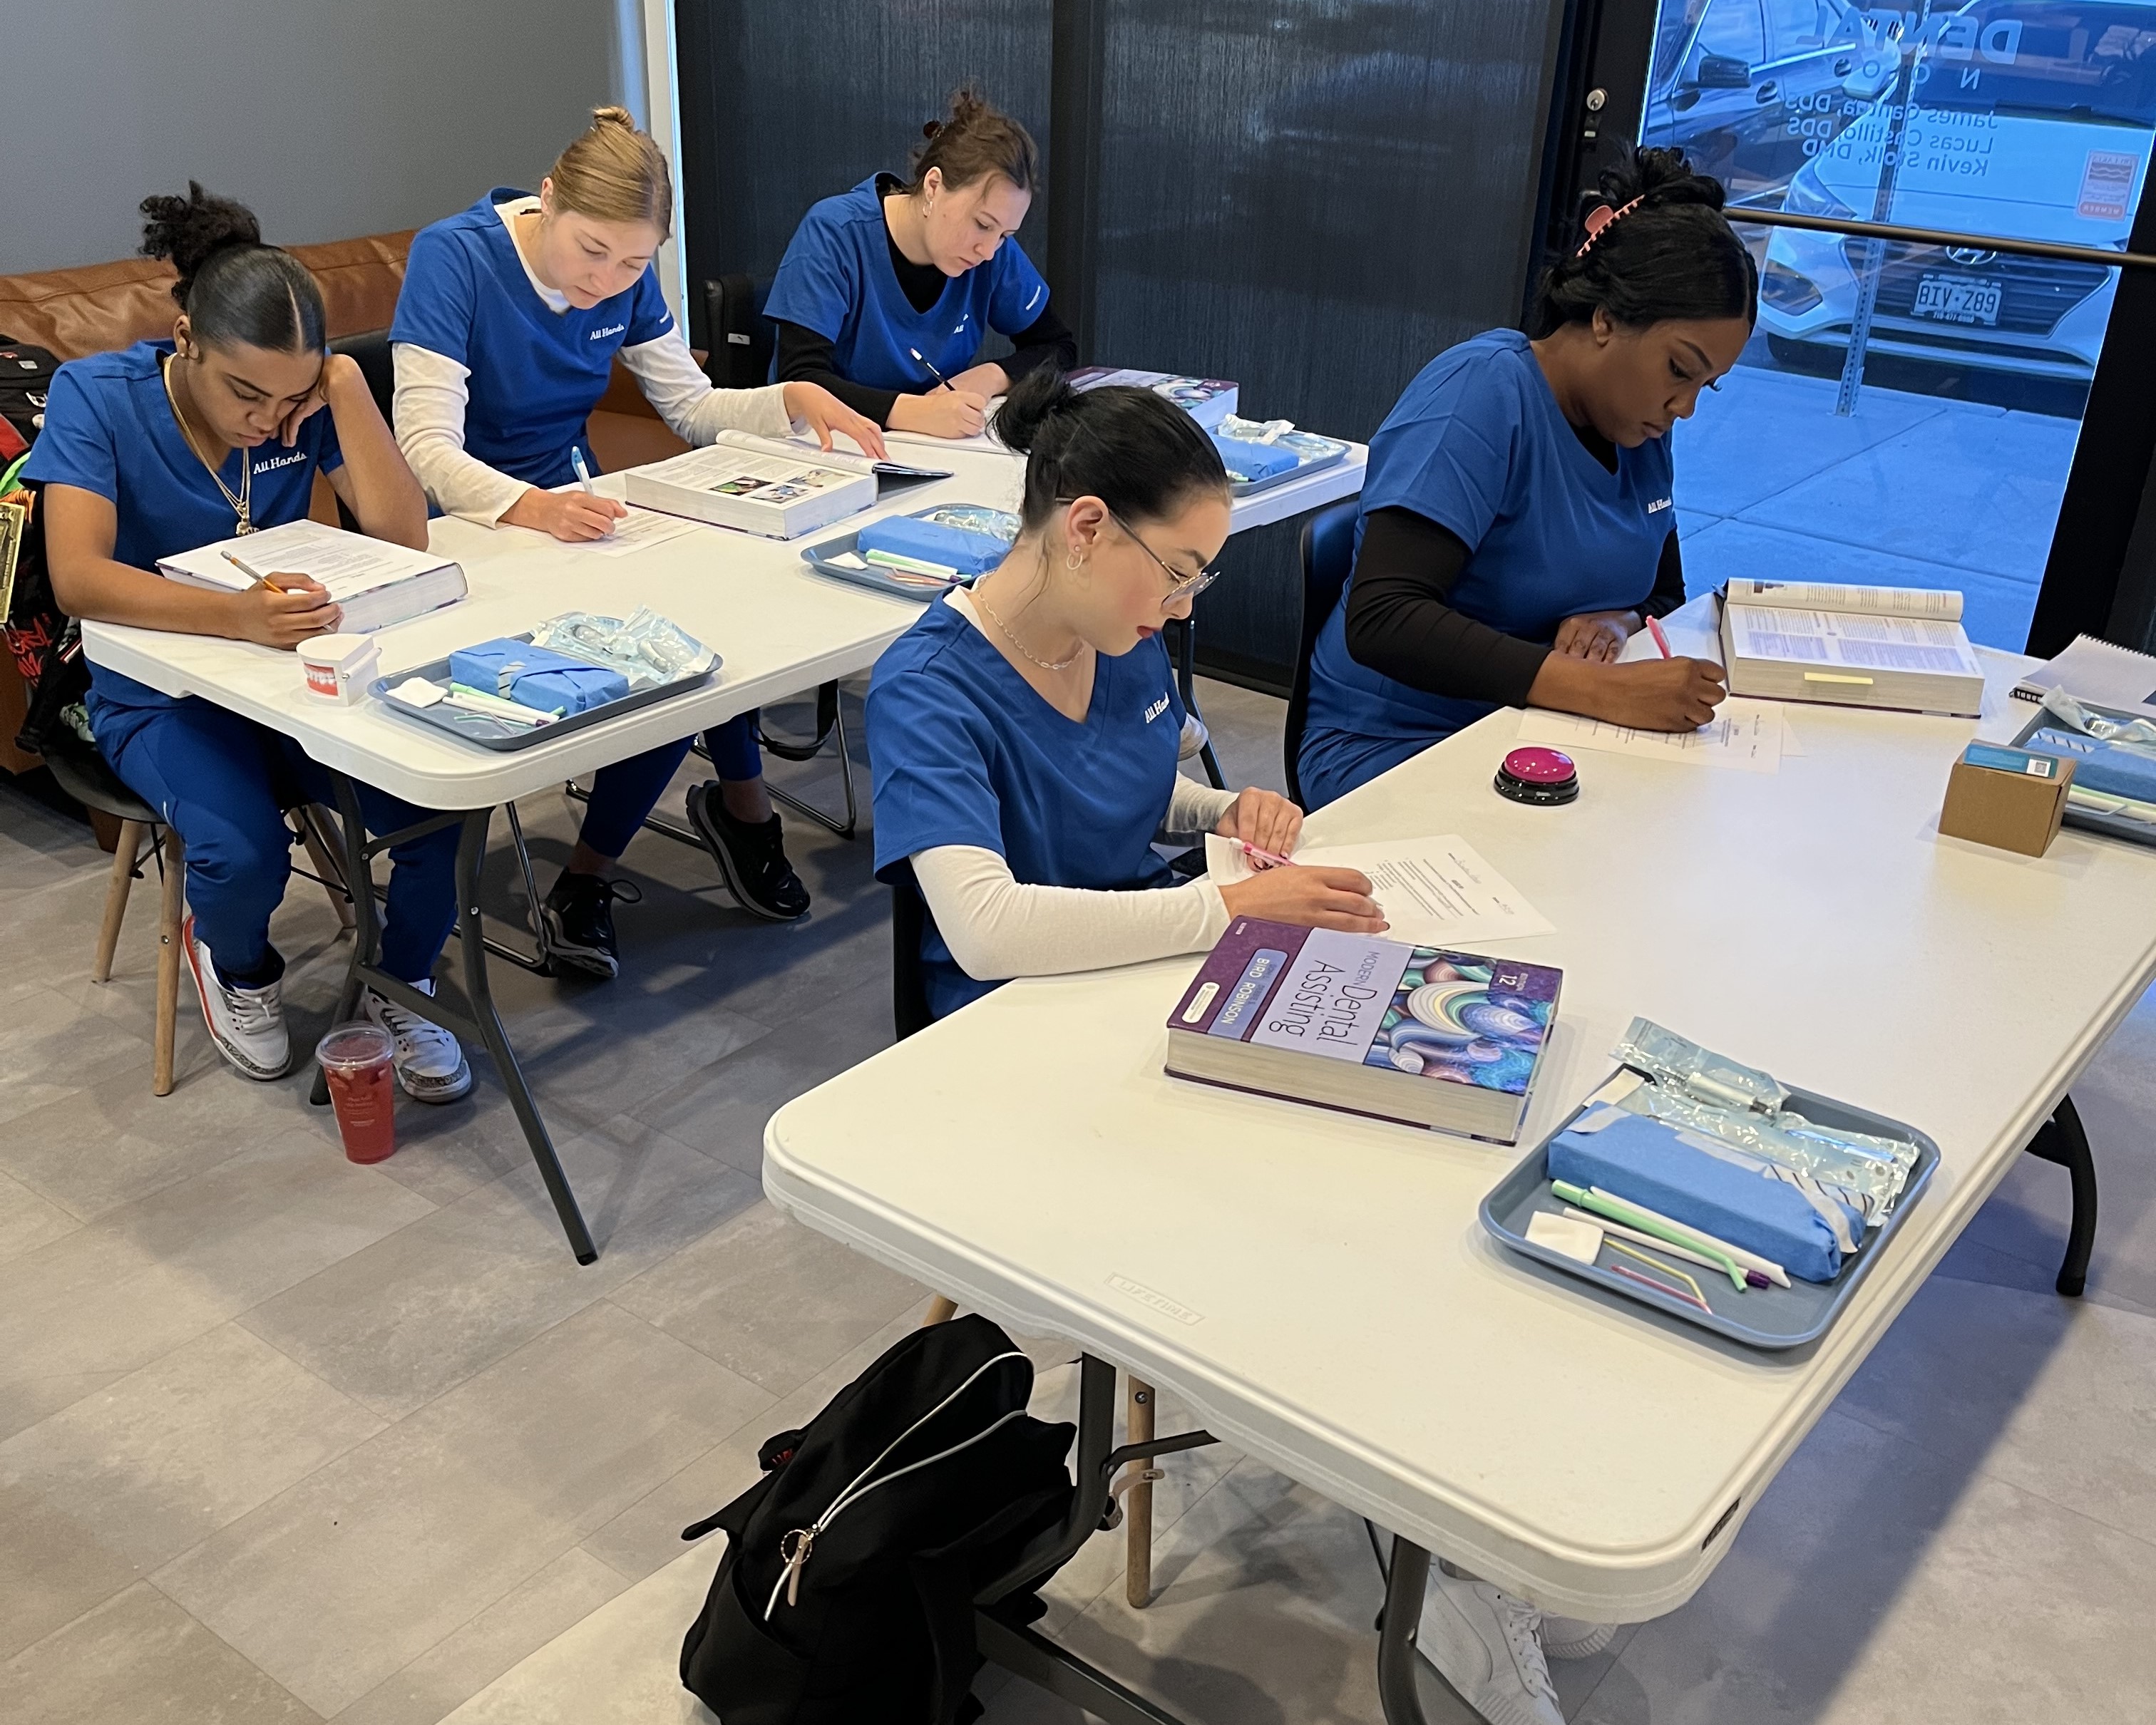 a group of people dressed in blue uniforms, sitting at white tables
            and studying on documents and books. They appear to be in a
            medical or healthcare environment, perhaps studying or training for
            some profession related to Dental Assisting at All hands dental
            school